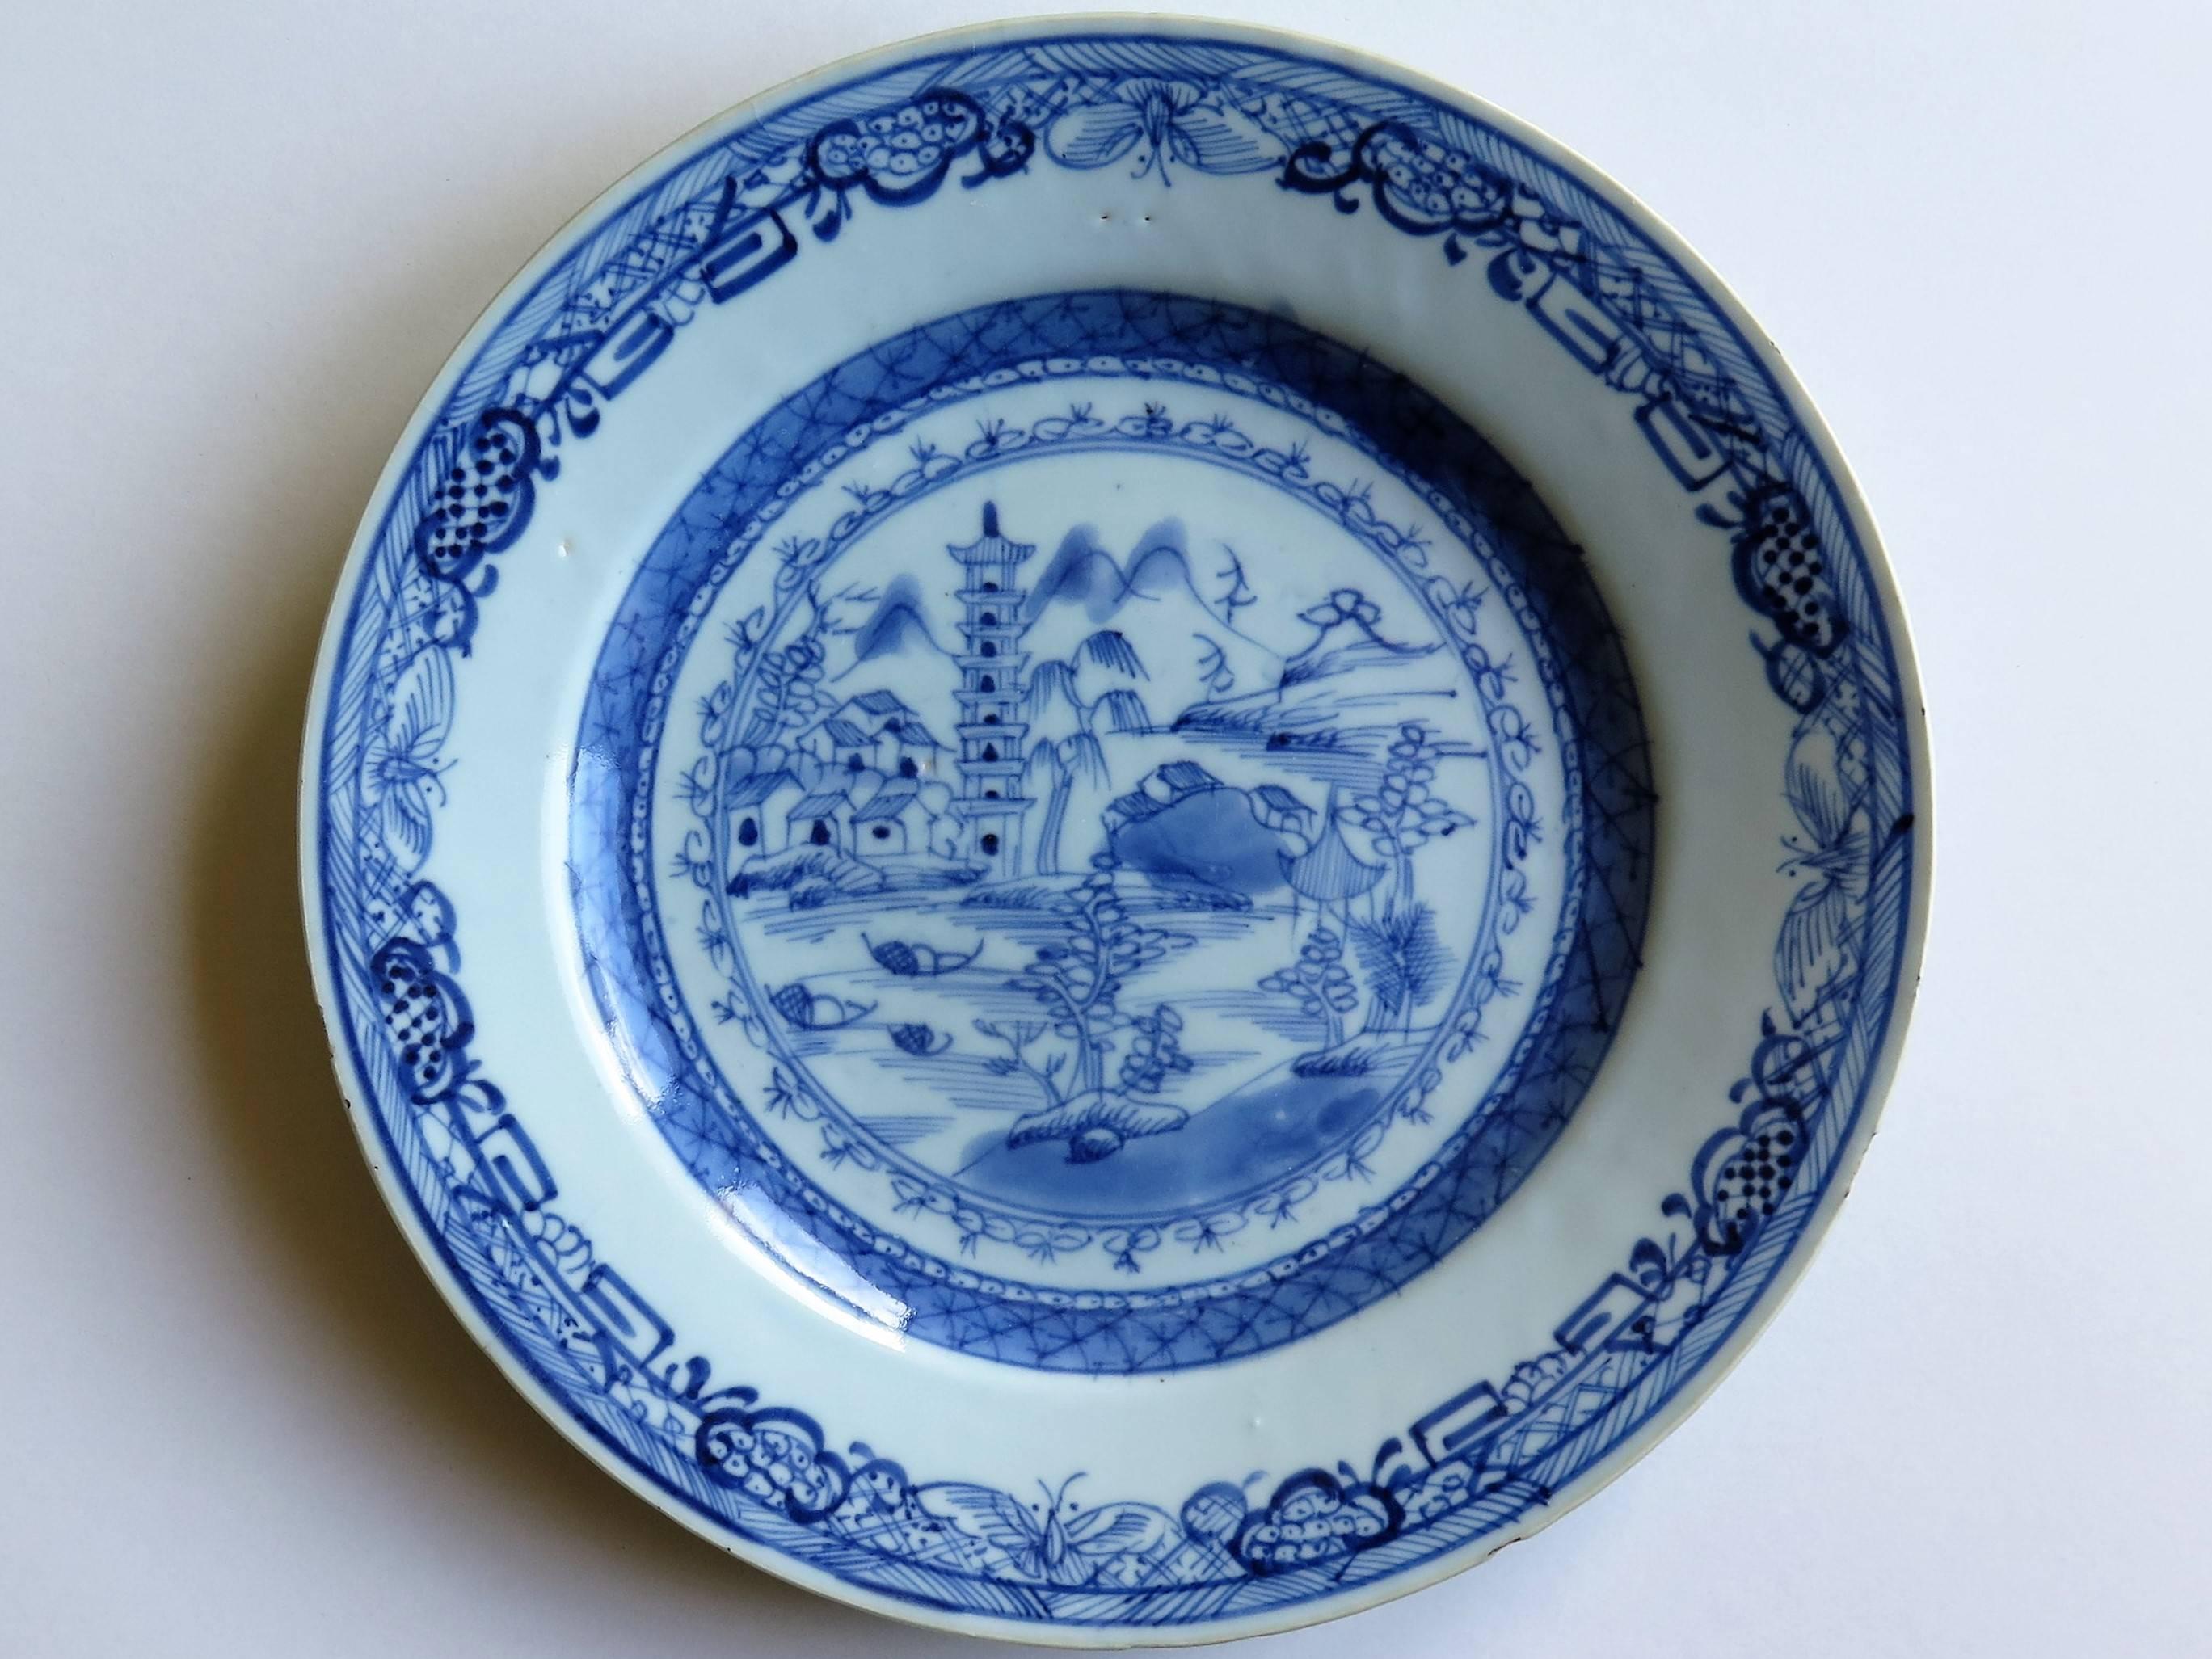 Hand-Painted 18th Century Chinese Export Blue and White Porcelain Plate, Qing Ca 1780